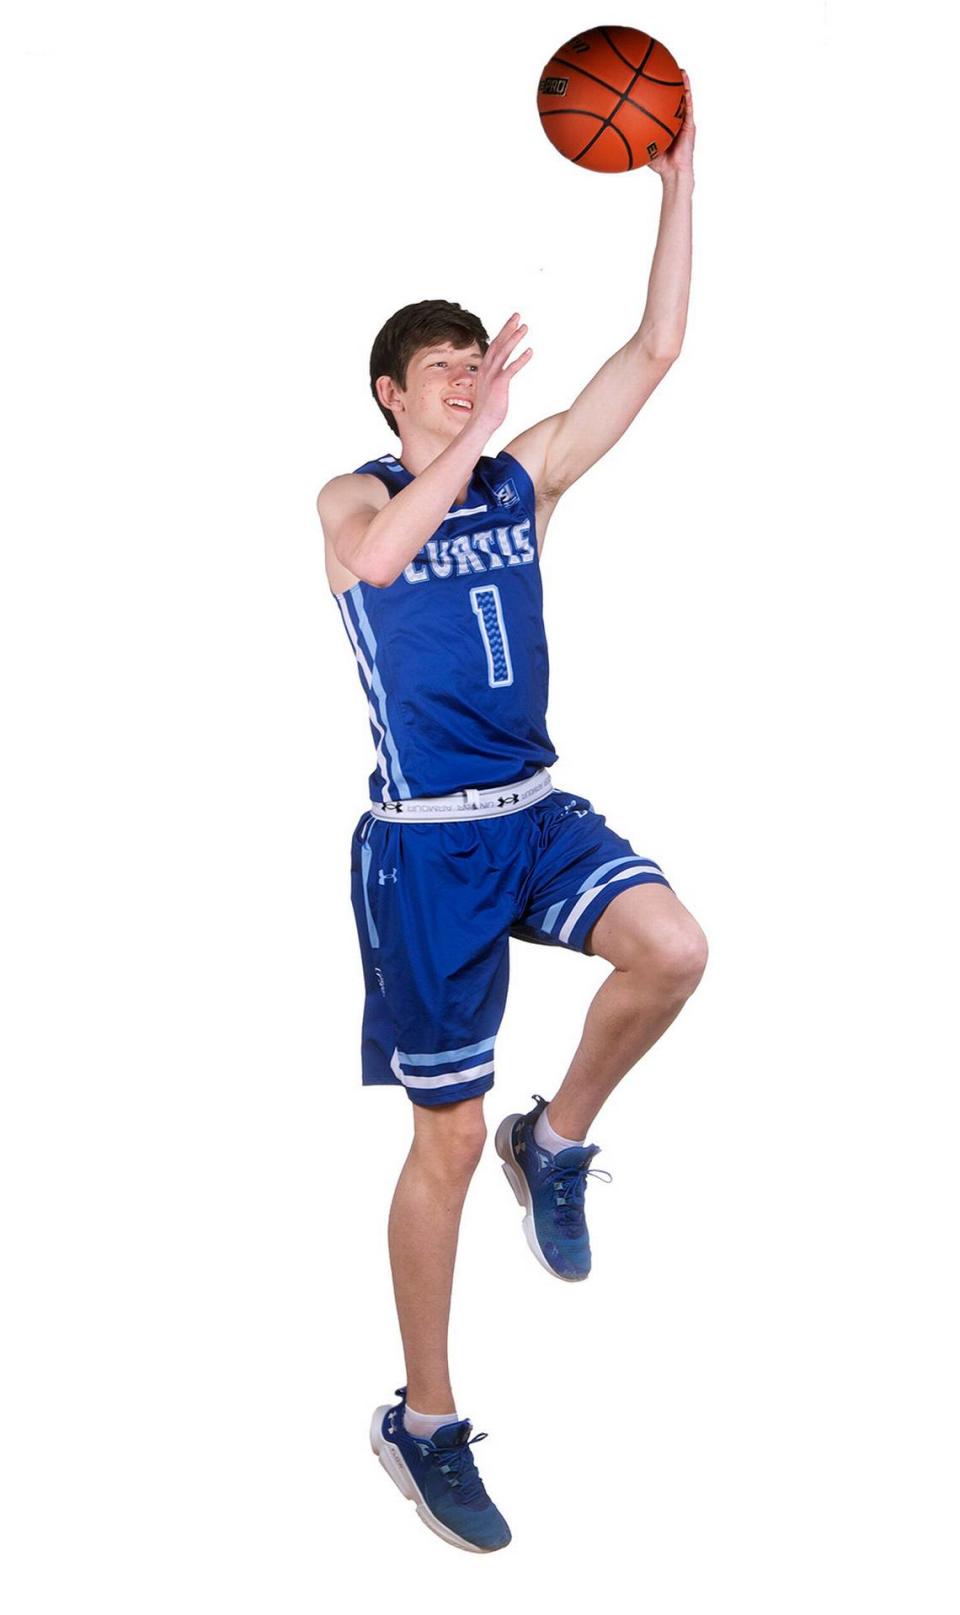 Curtis senior Tyce Paulsen is one of six players named to The News Tribune’s All Area Boys Basketball Team. He is photographed at Curtis High School in University Place, Washington, on Wednesday, March 15, 2023.